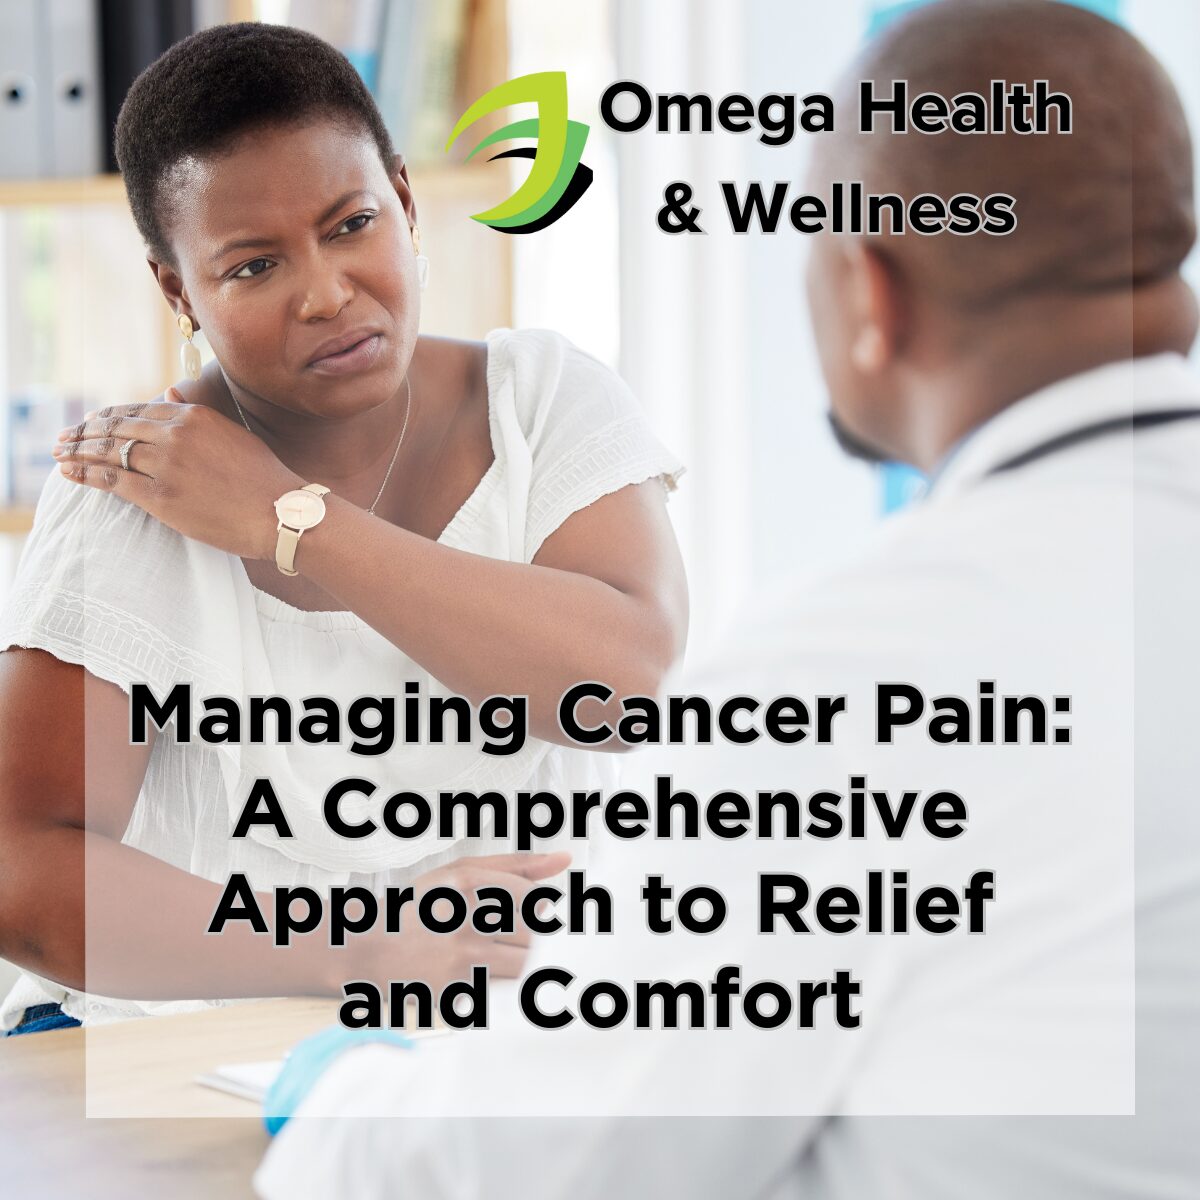 Managing Cancer Pain: A Comprehensive Approach to Relief and Comfort